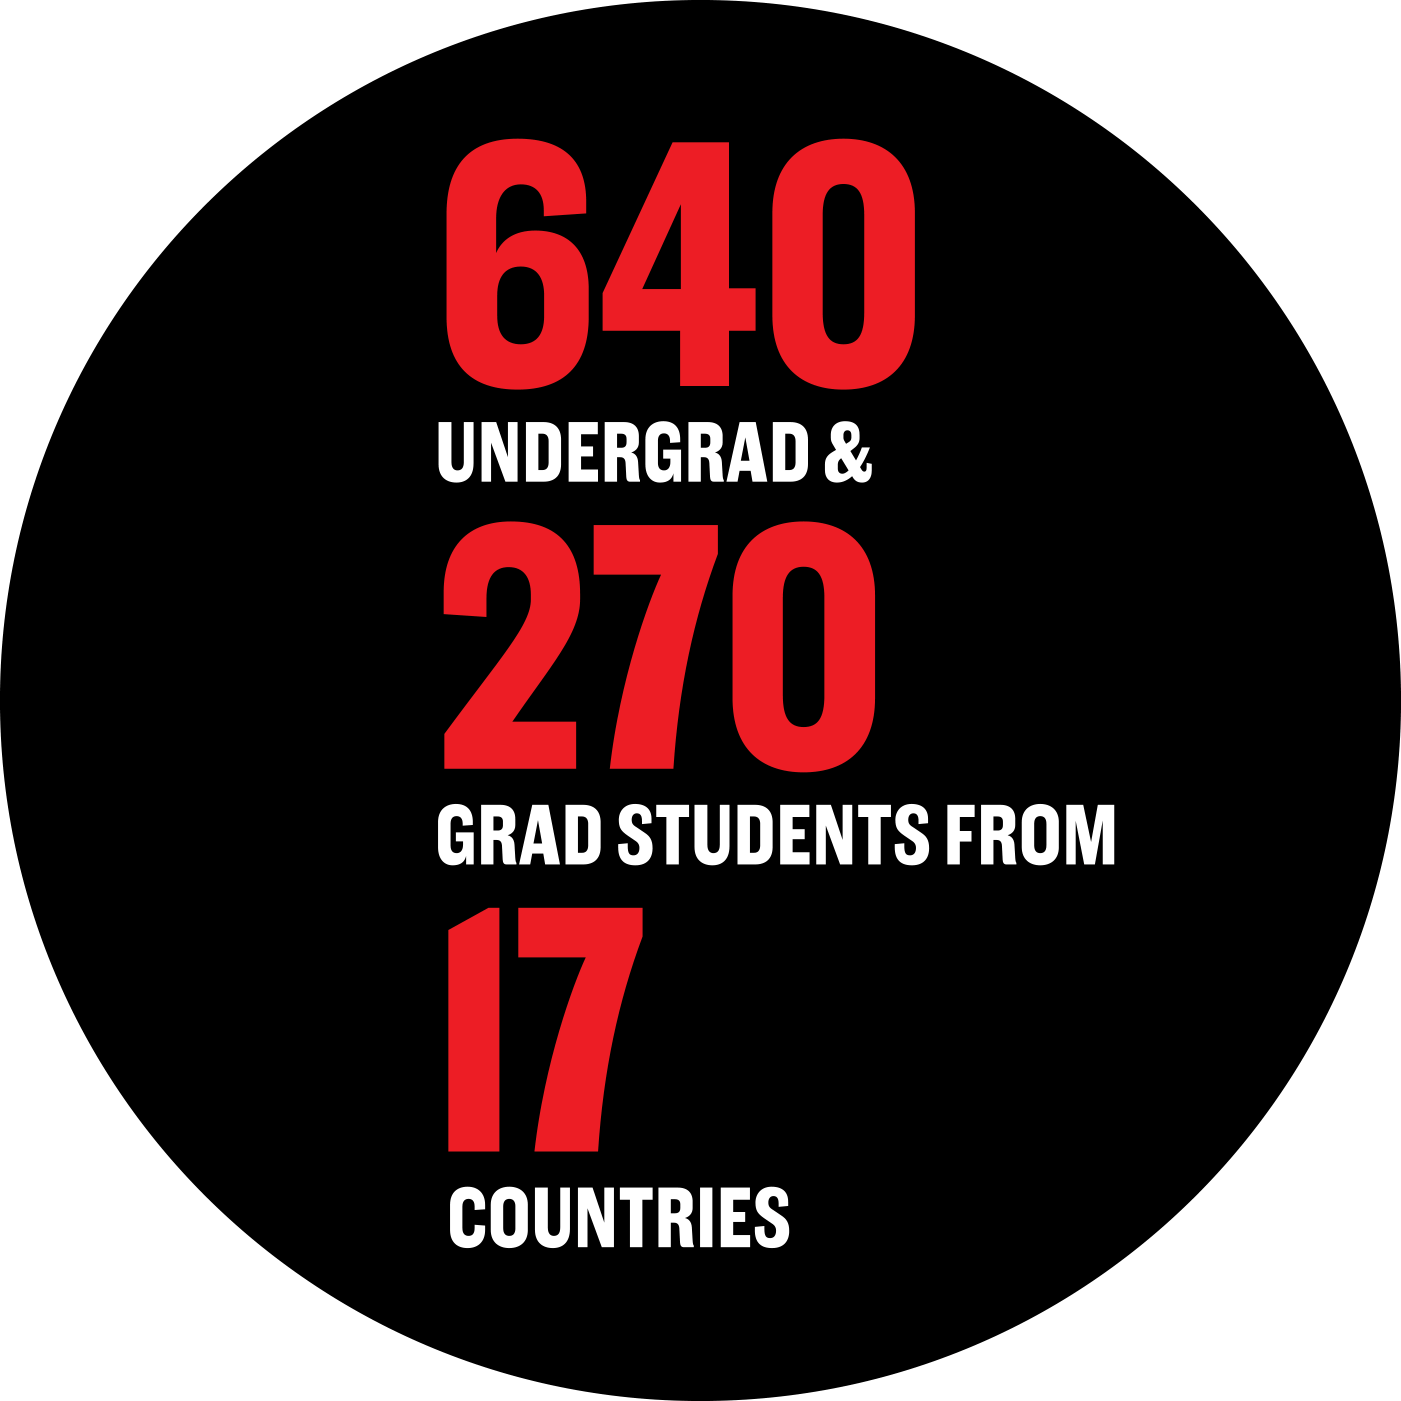 640 undergrad & 270 grad students from 17 countries